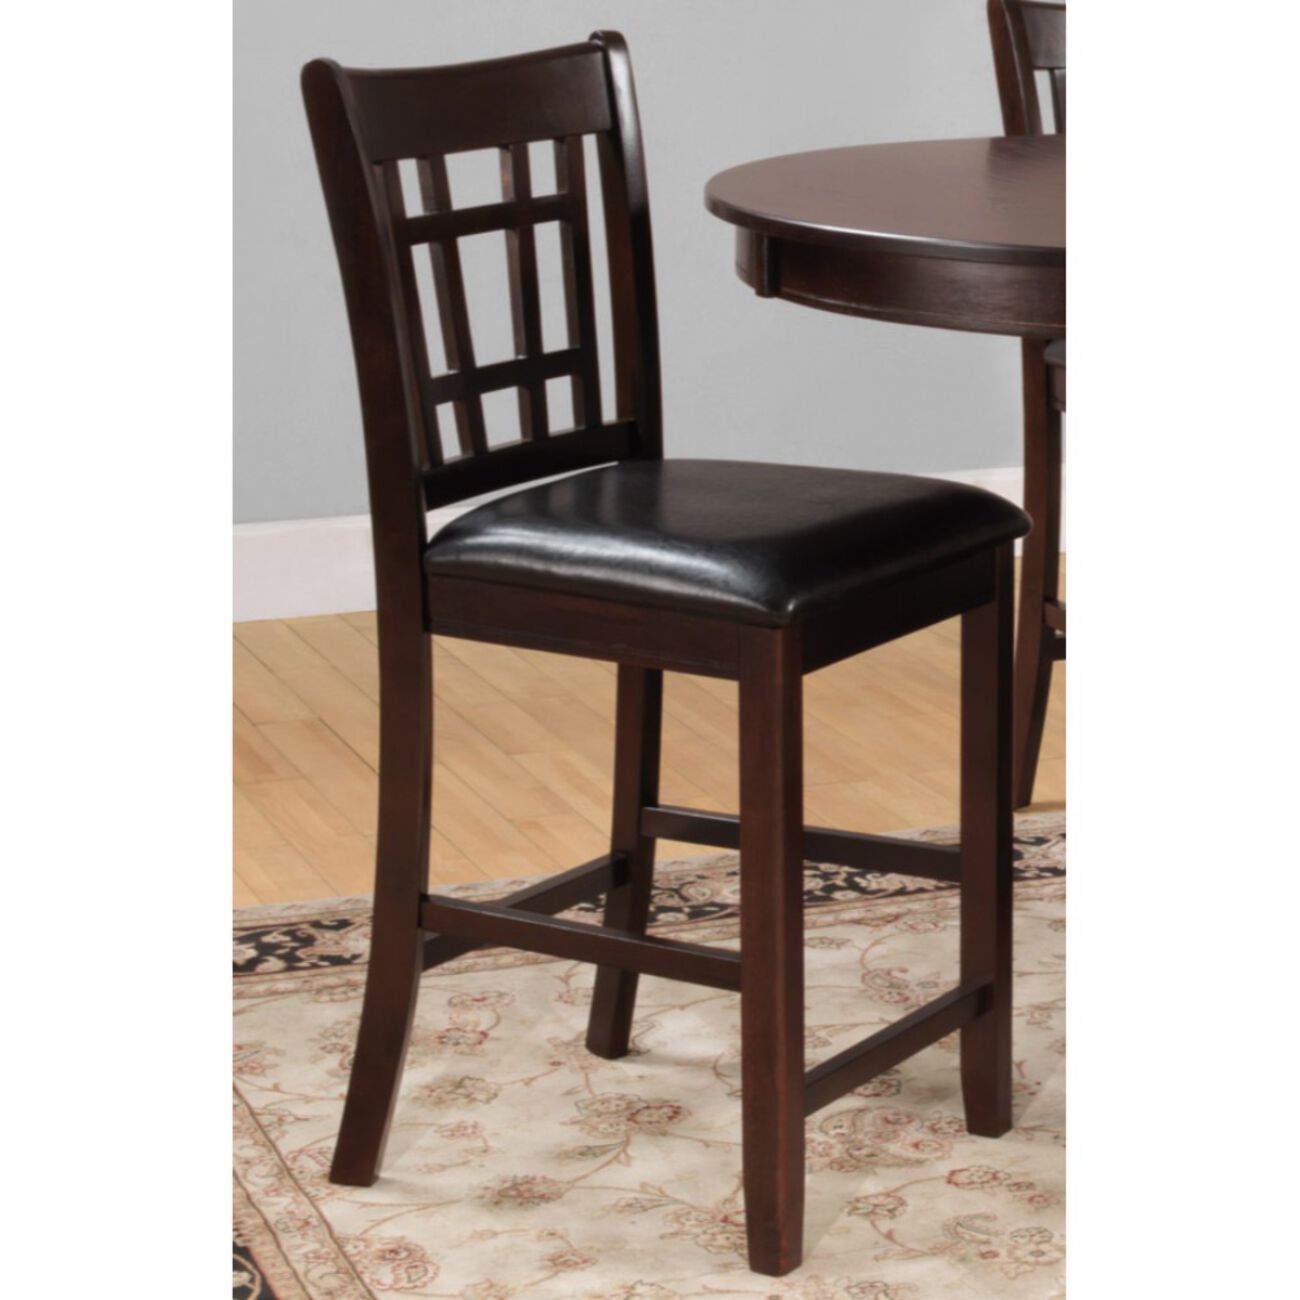 Wooden Counter Height Chair With Leatherette Seat, Dark Cherry Brown, Set of 2